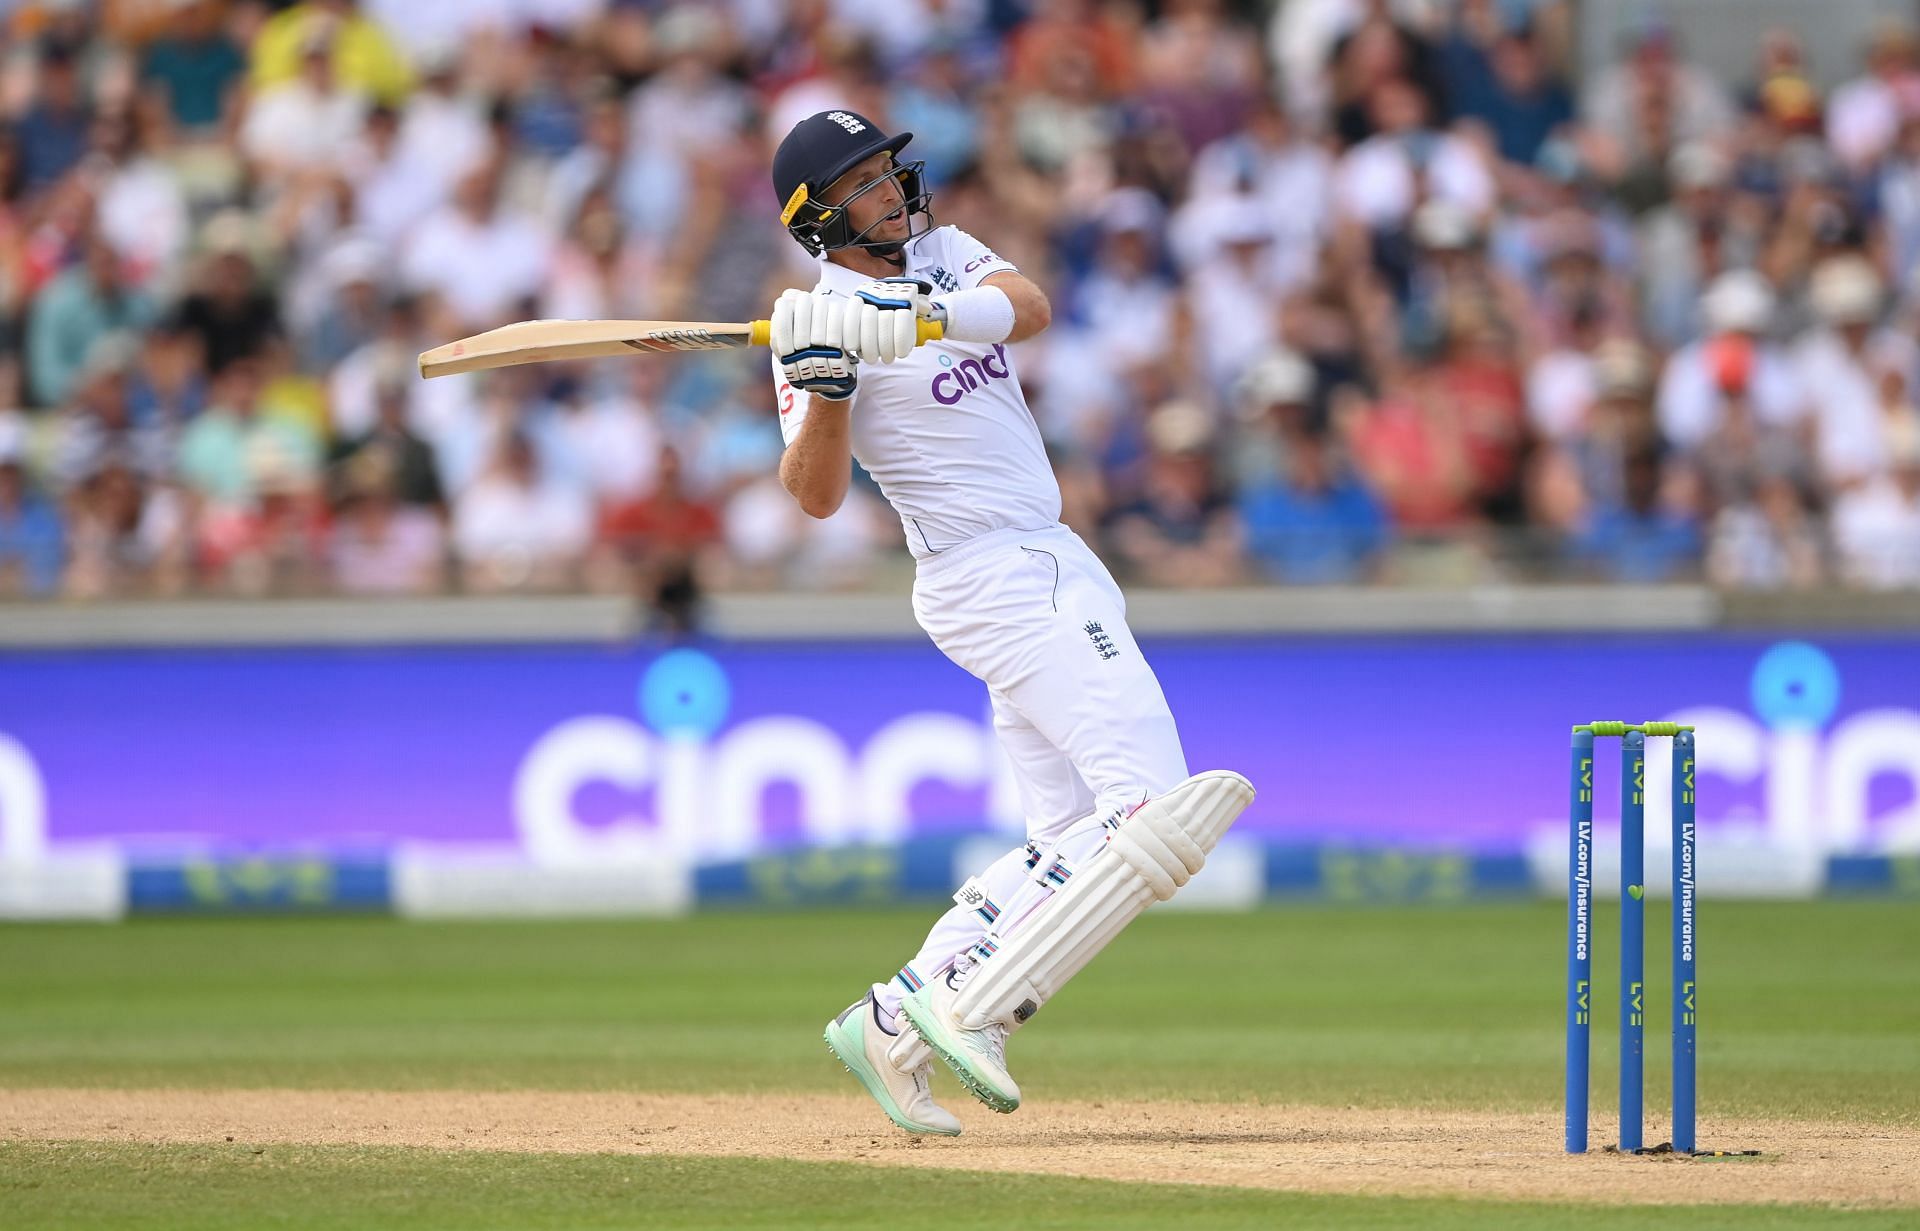 Joe Root played a few unconventional shots during his innings.